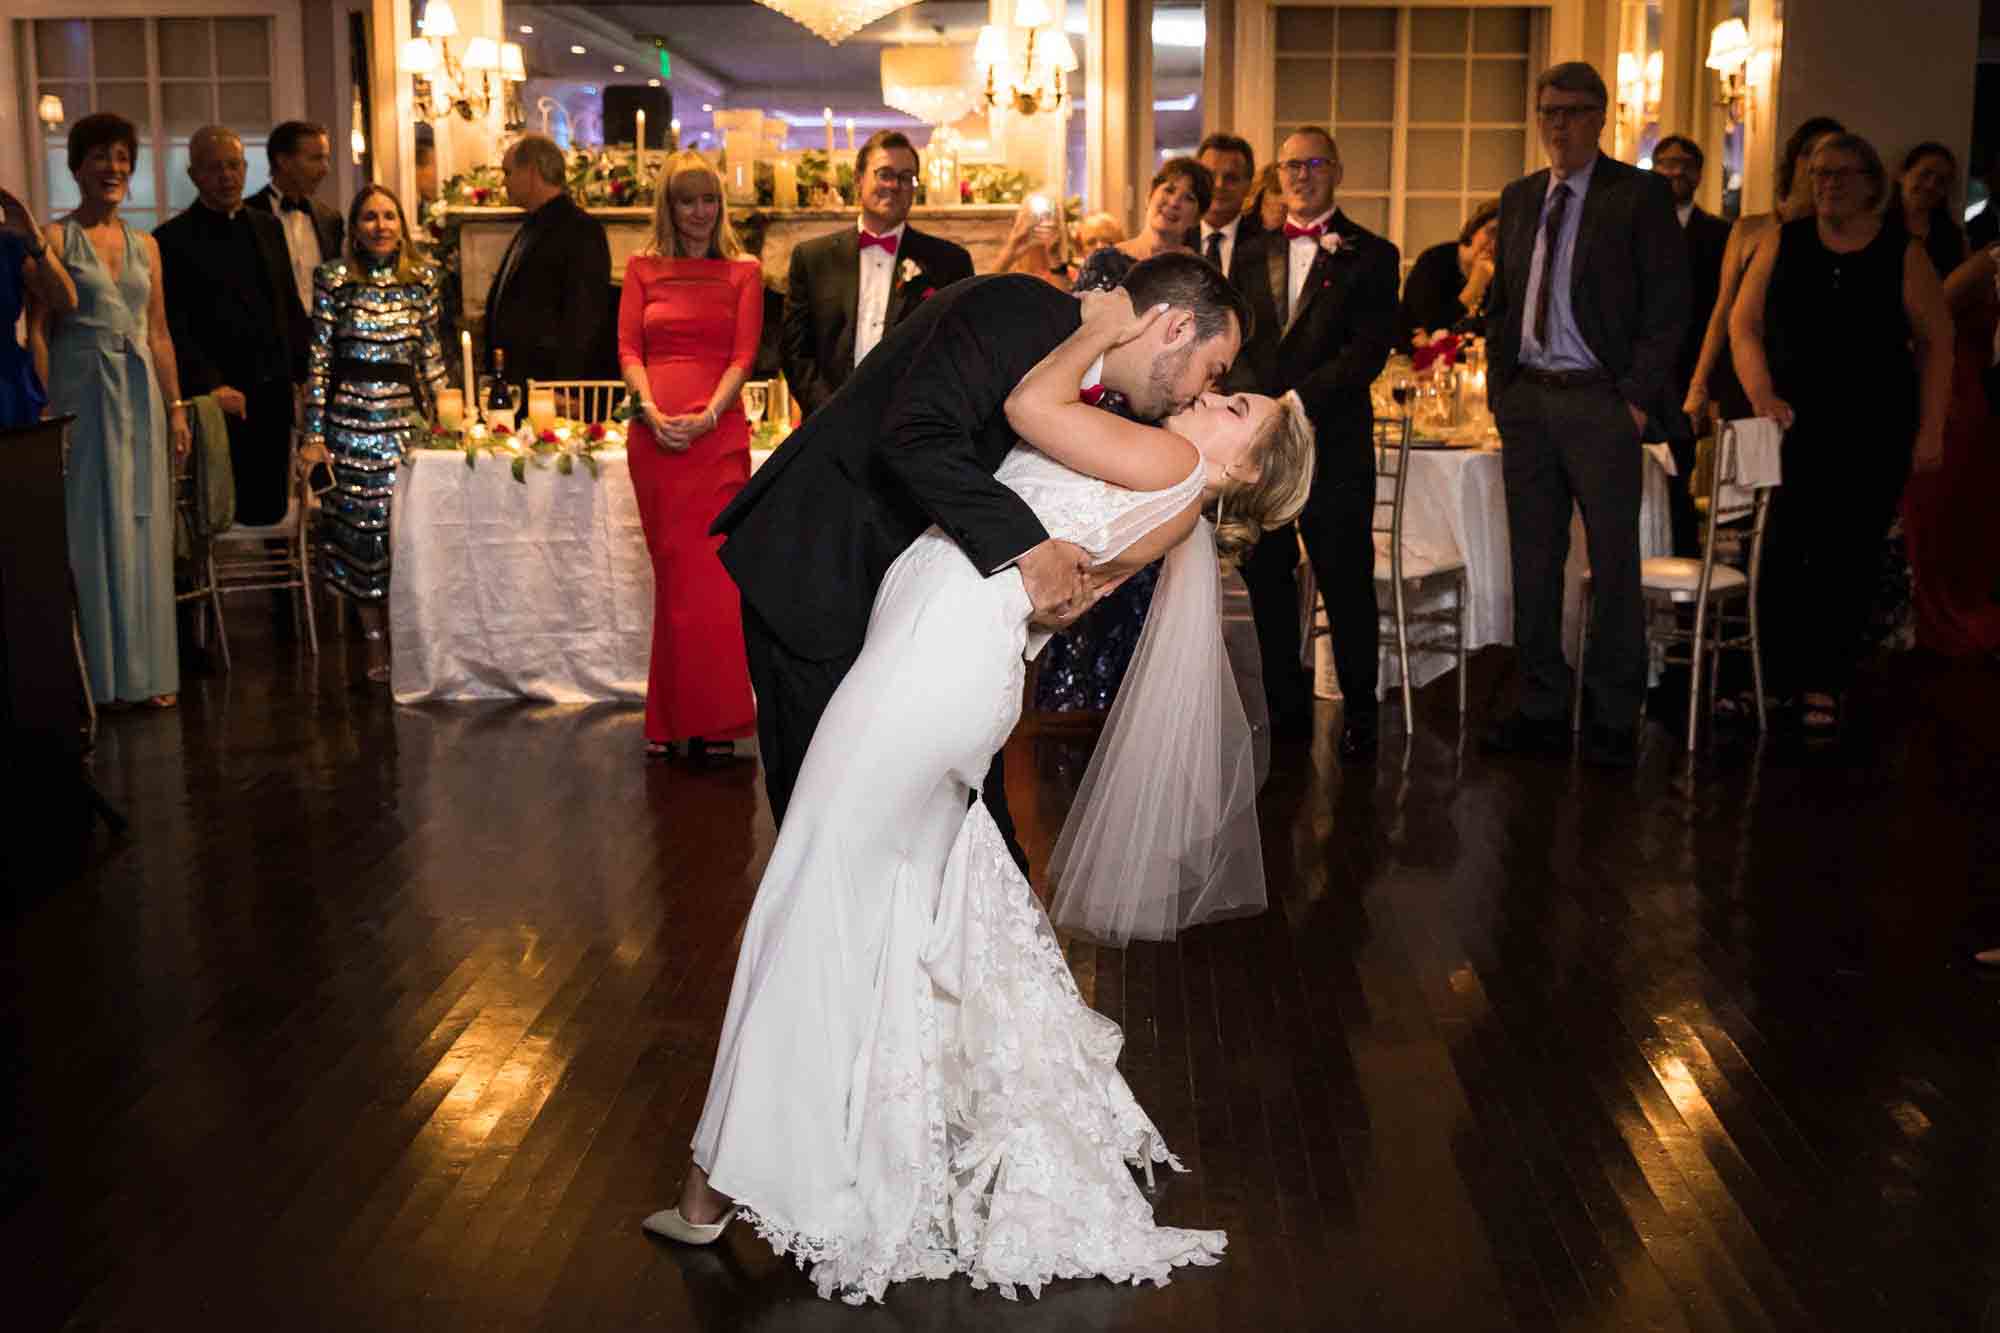 Groom kissing bride with dramatic dip during first dance at a Briarcliff Manor wedding